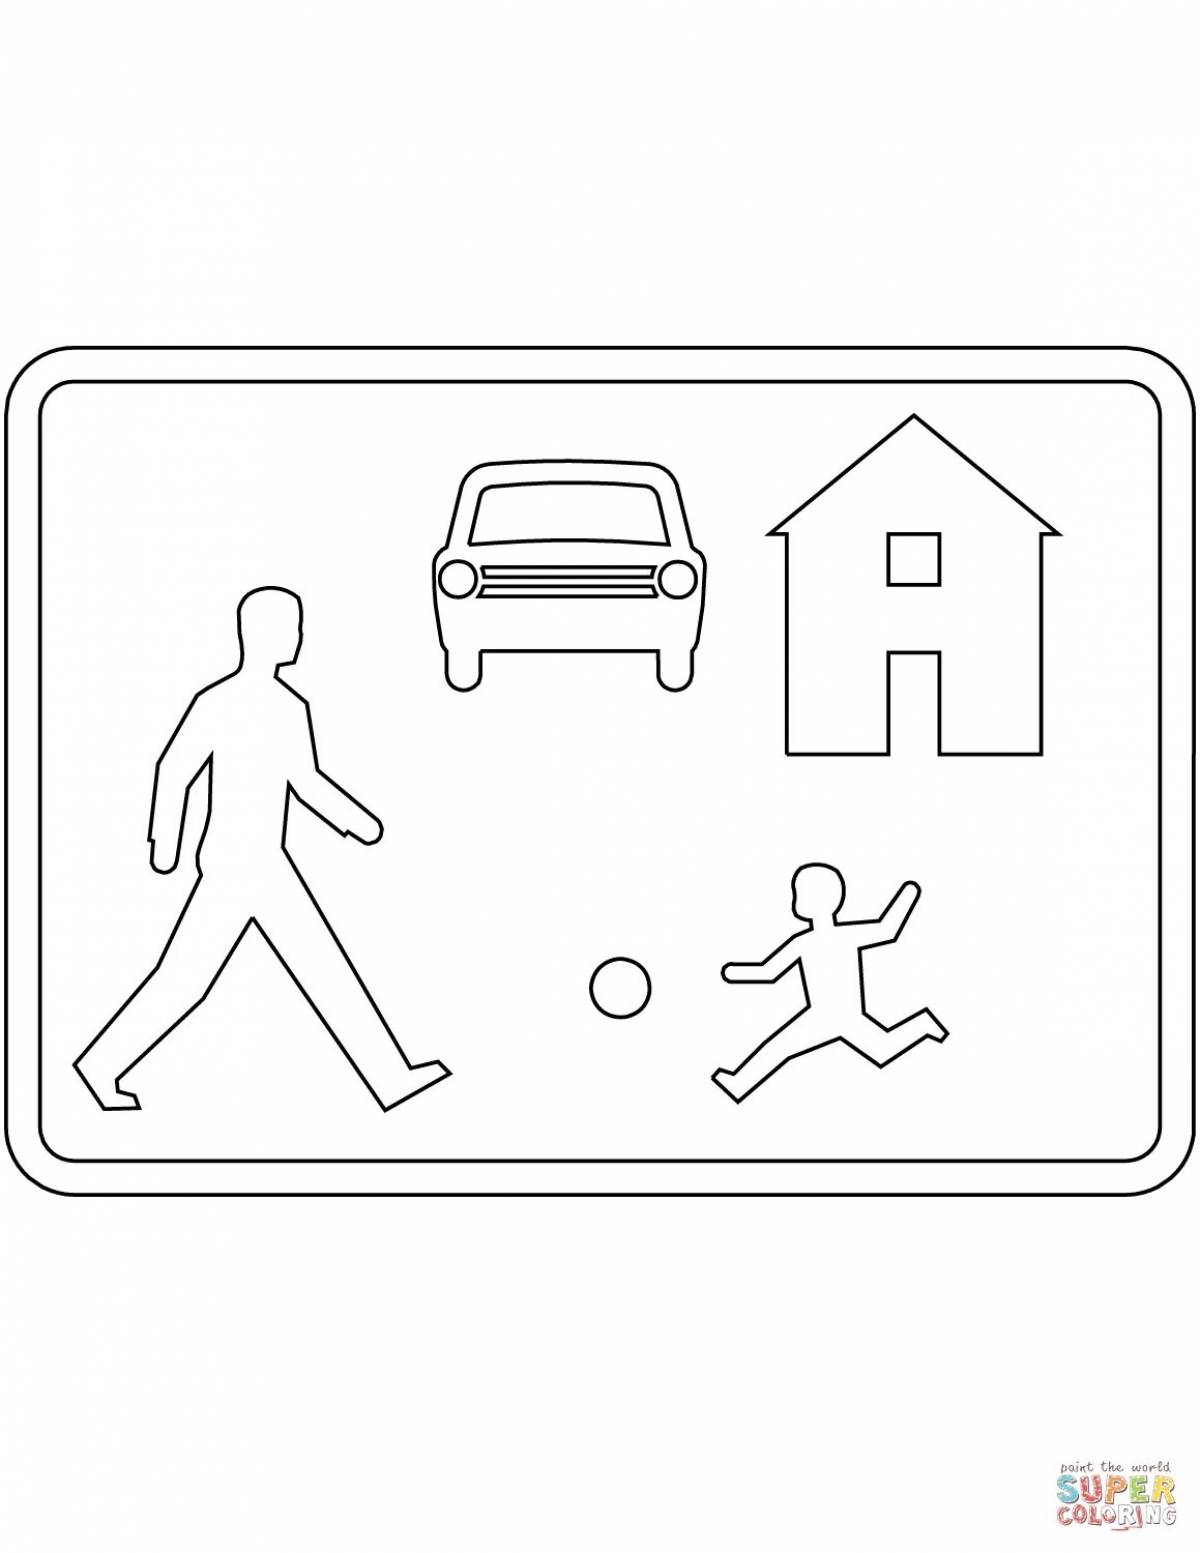 Traffic signs for children 4 5 years old #11